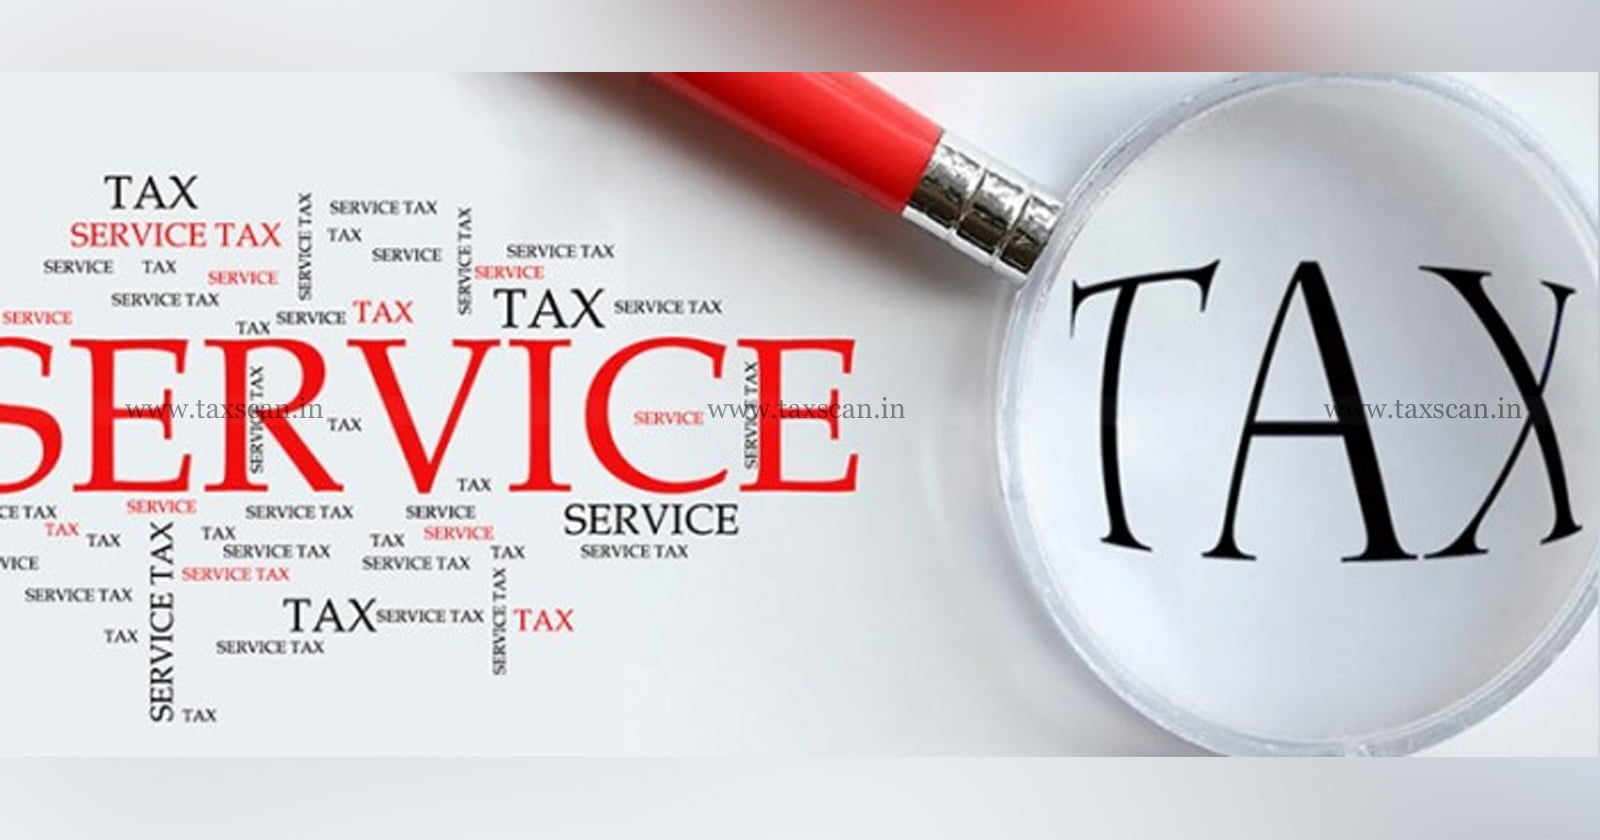 Service Tax - Commission received - General Sales Agent - Sales Agent - Foreign Company - CESTAT - Customs - Excise - Taxscan